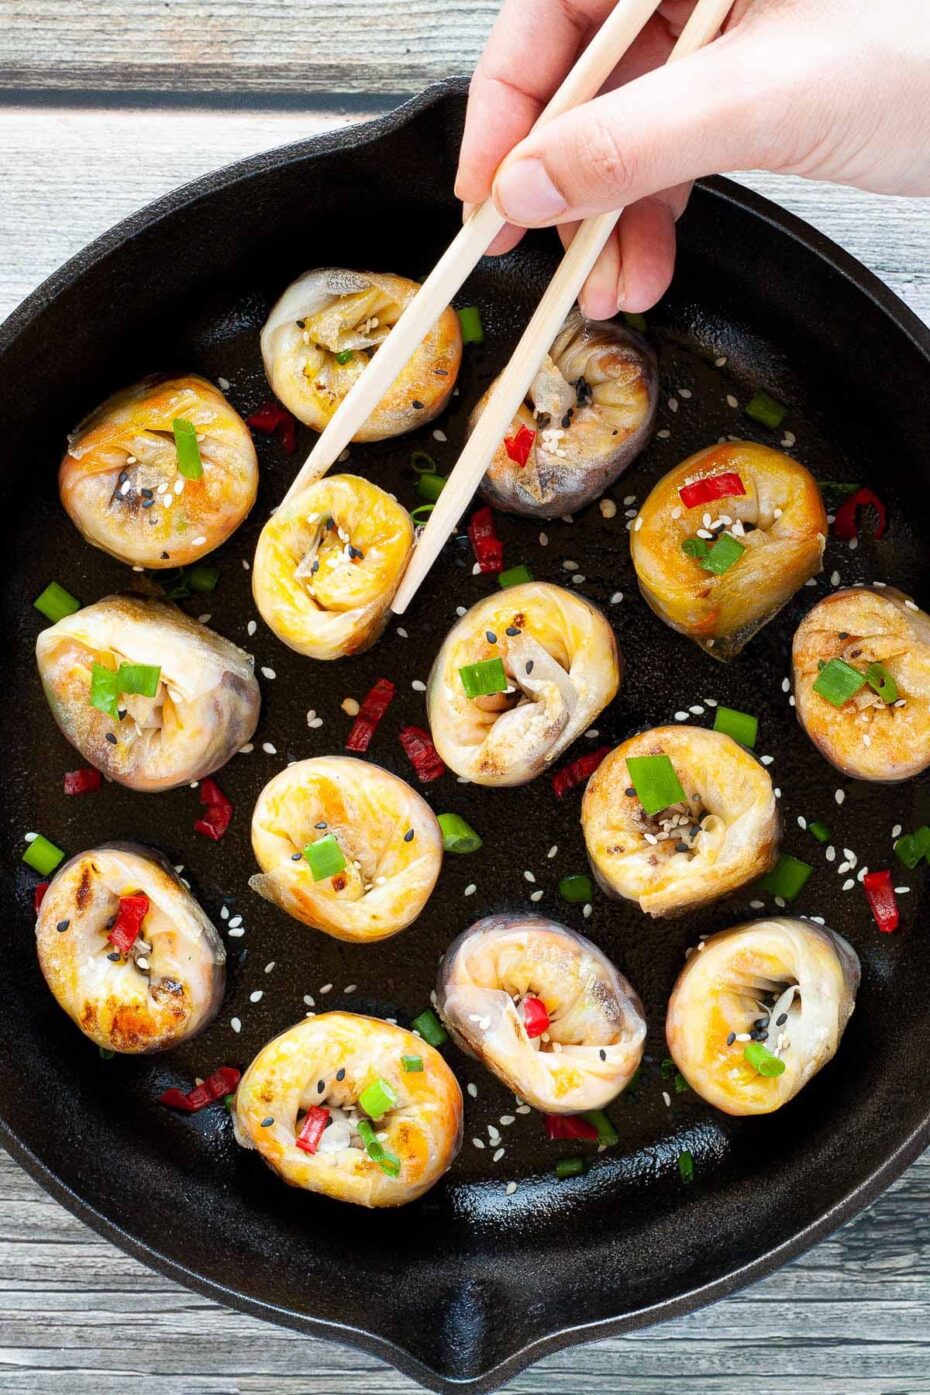 Lots of round-shaped rice paper dumplings in a black cast iron skillet facing upwards sprinkled with sesame seeds, chopped spring onion and red hot pepper around a brown dipping sauce. A hand is holding wooden chopsticks.